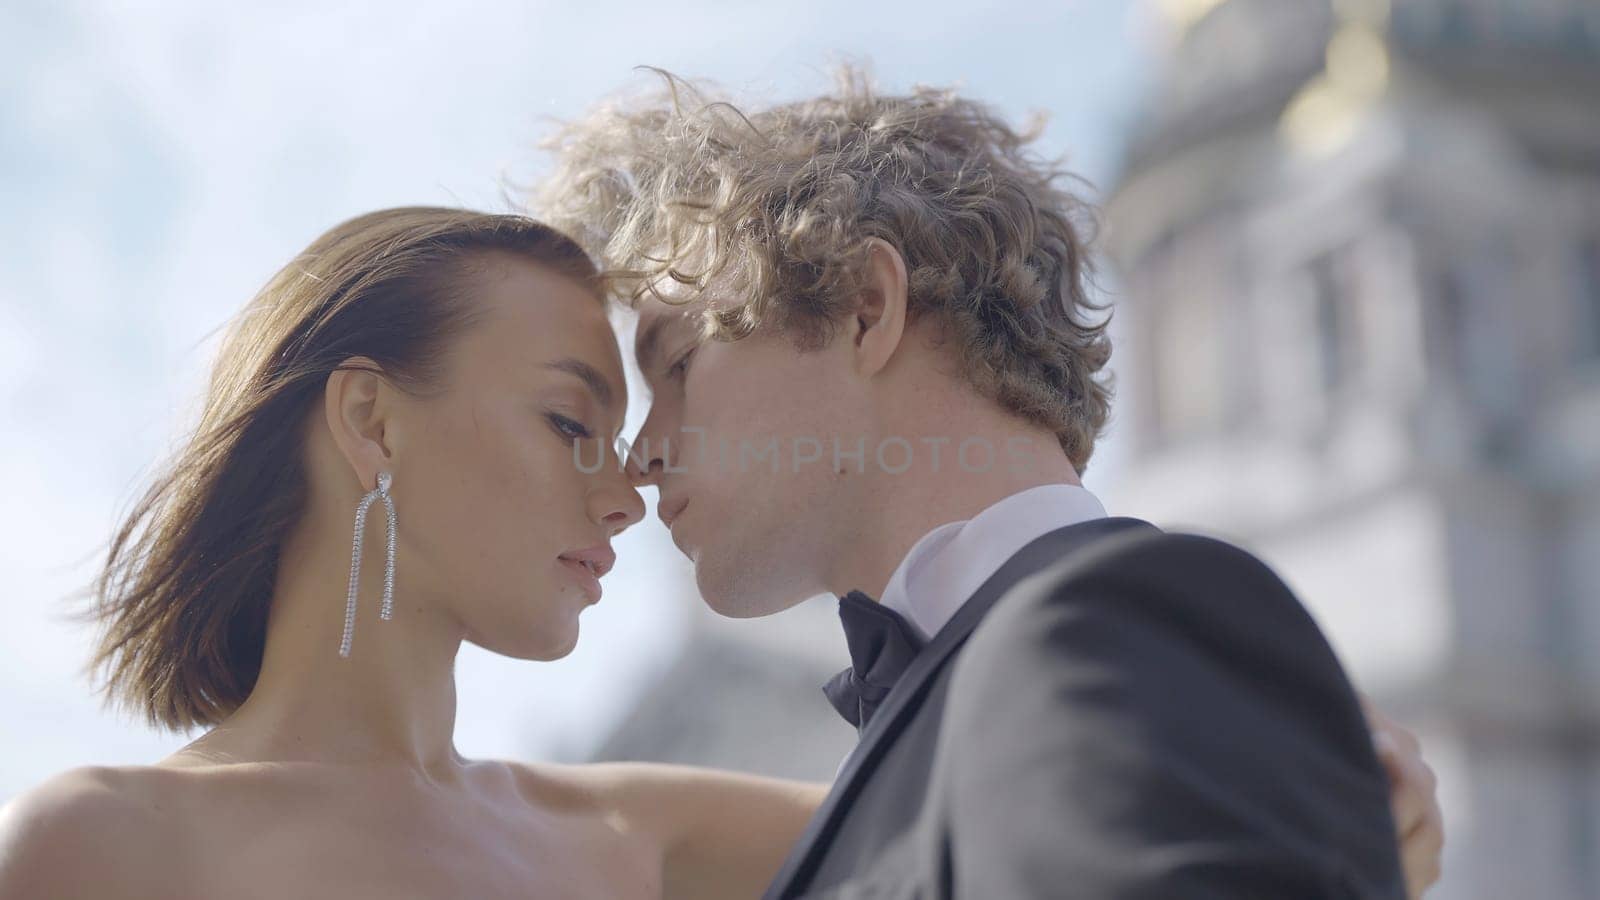 Elegant newlyweds are close to each other. Action. Passionate and stylish newlyweds on background of blue sky. Close-up of passionate tension between hugging couple by Mediawhalestock